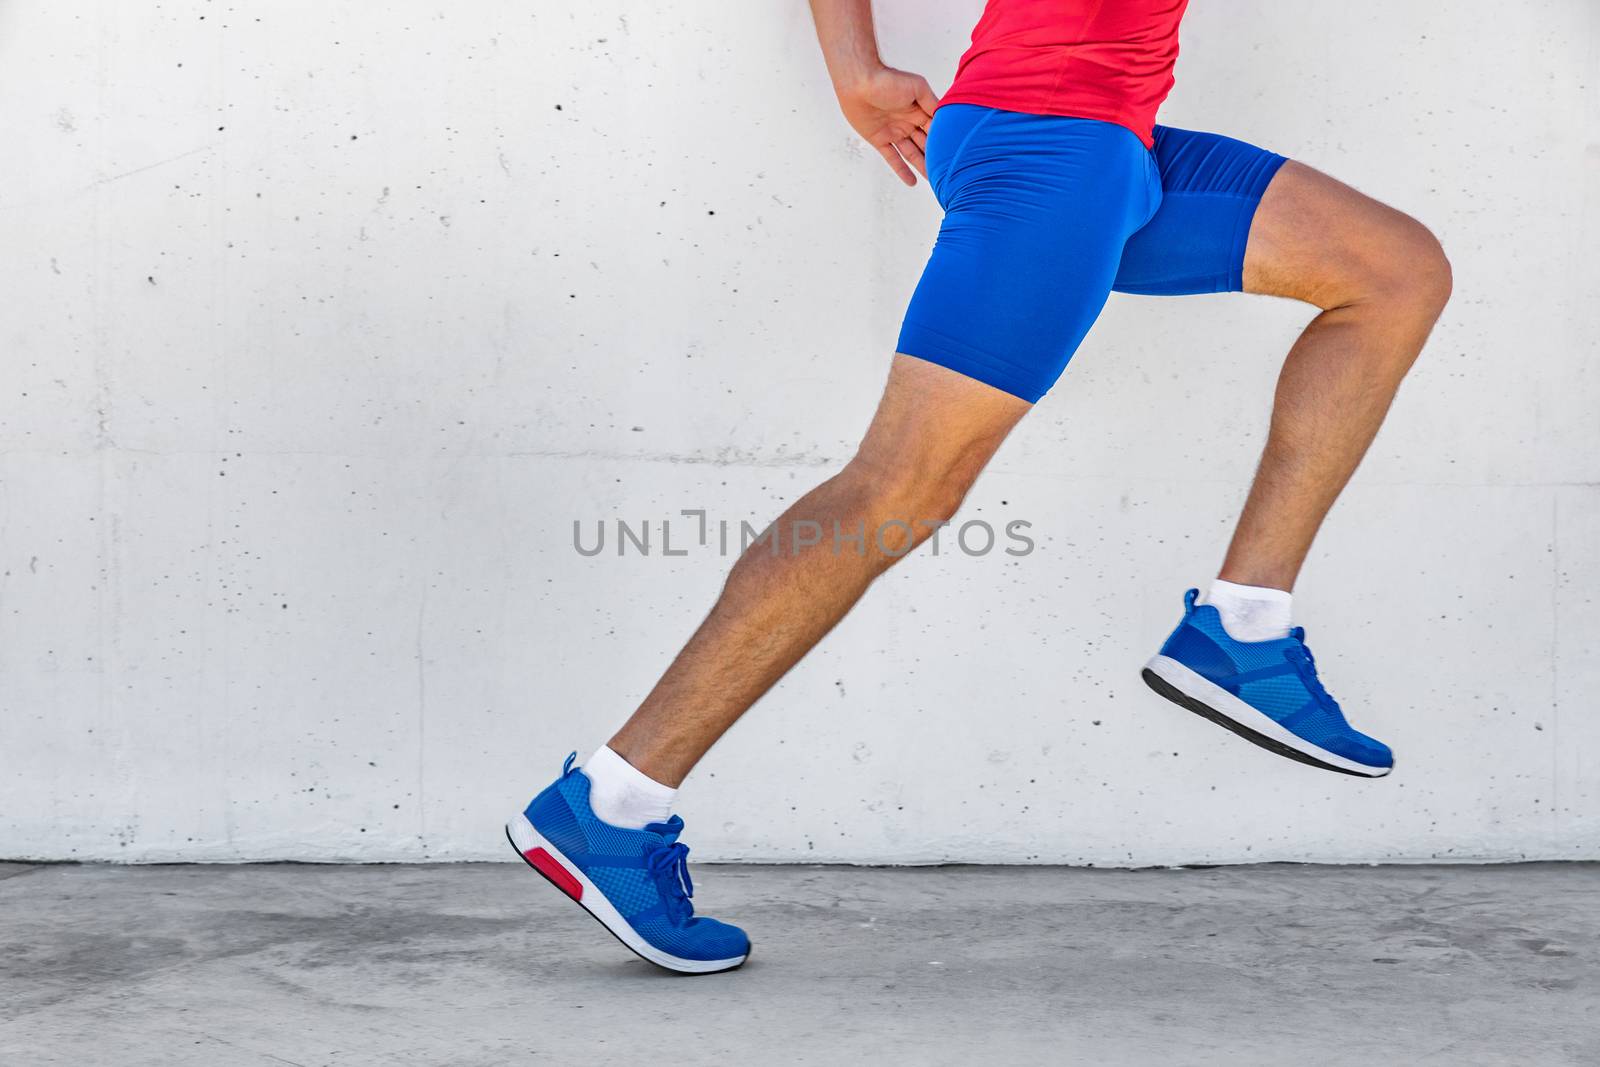 Fitness athlete man running on asphalt sidewalk in city street. Sport lifestyle. Closeup of lower body runner's legs on workout marathon run against white wall background. Shoes, compression clothing. by Maridav